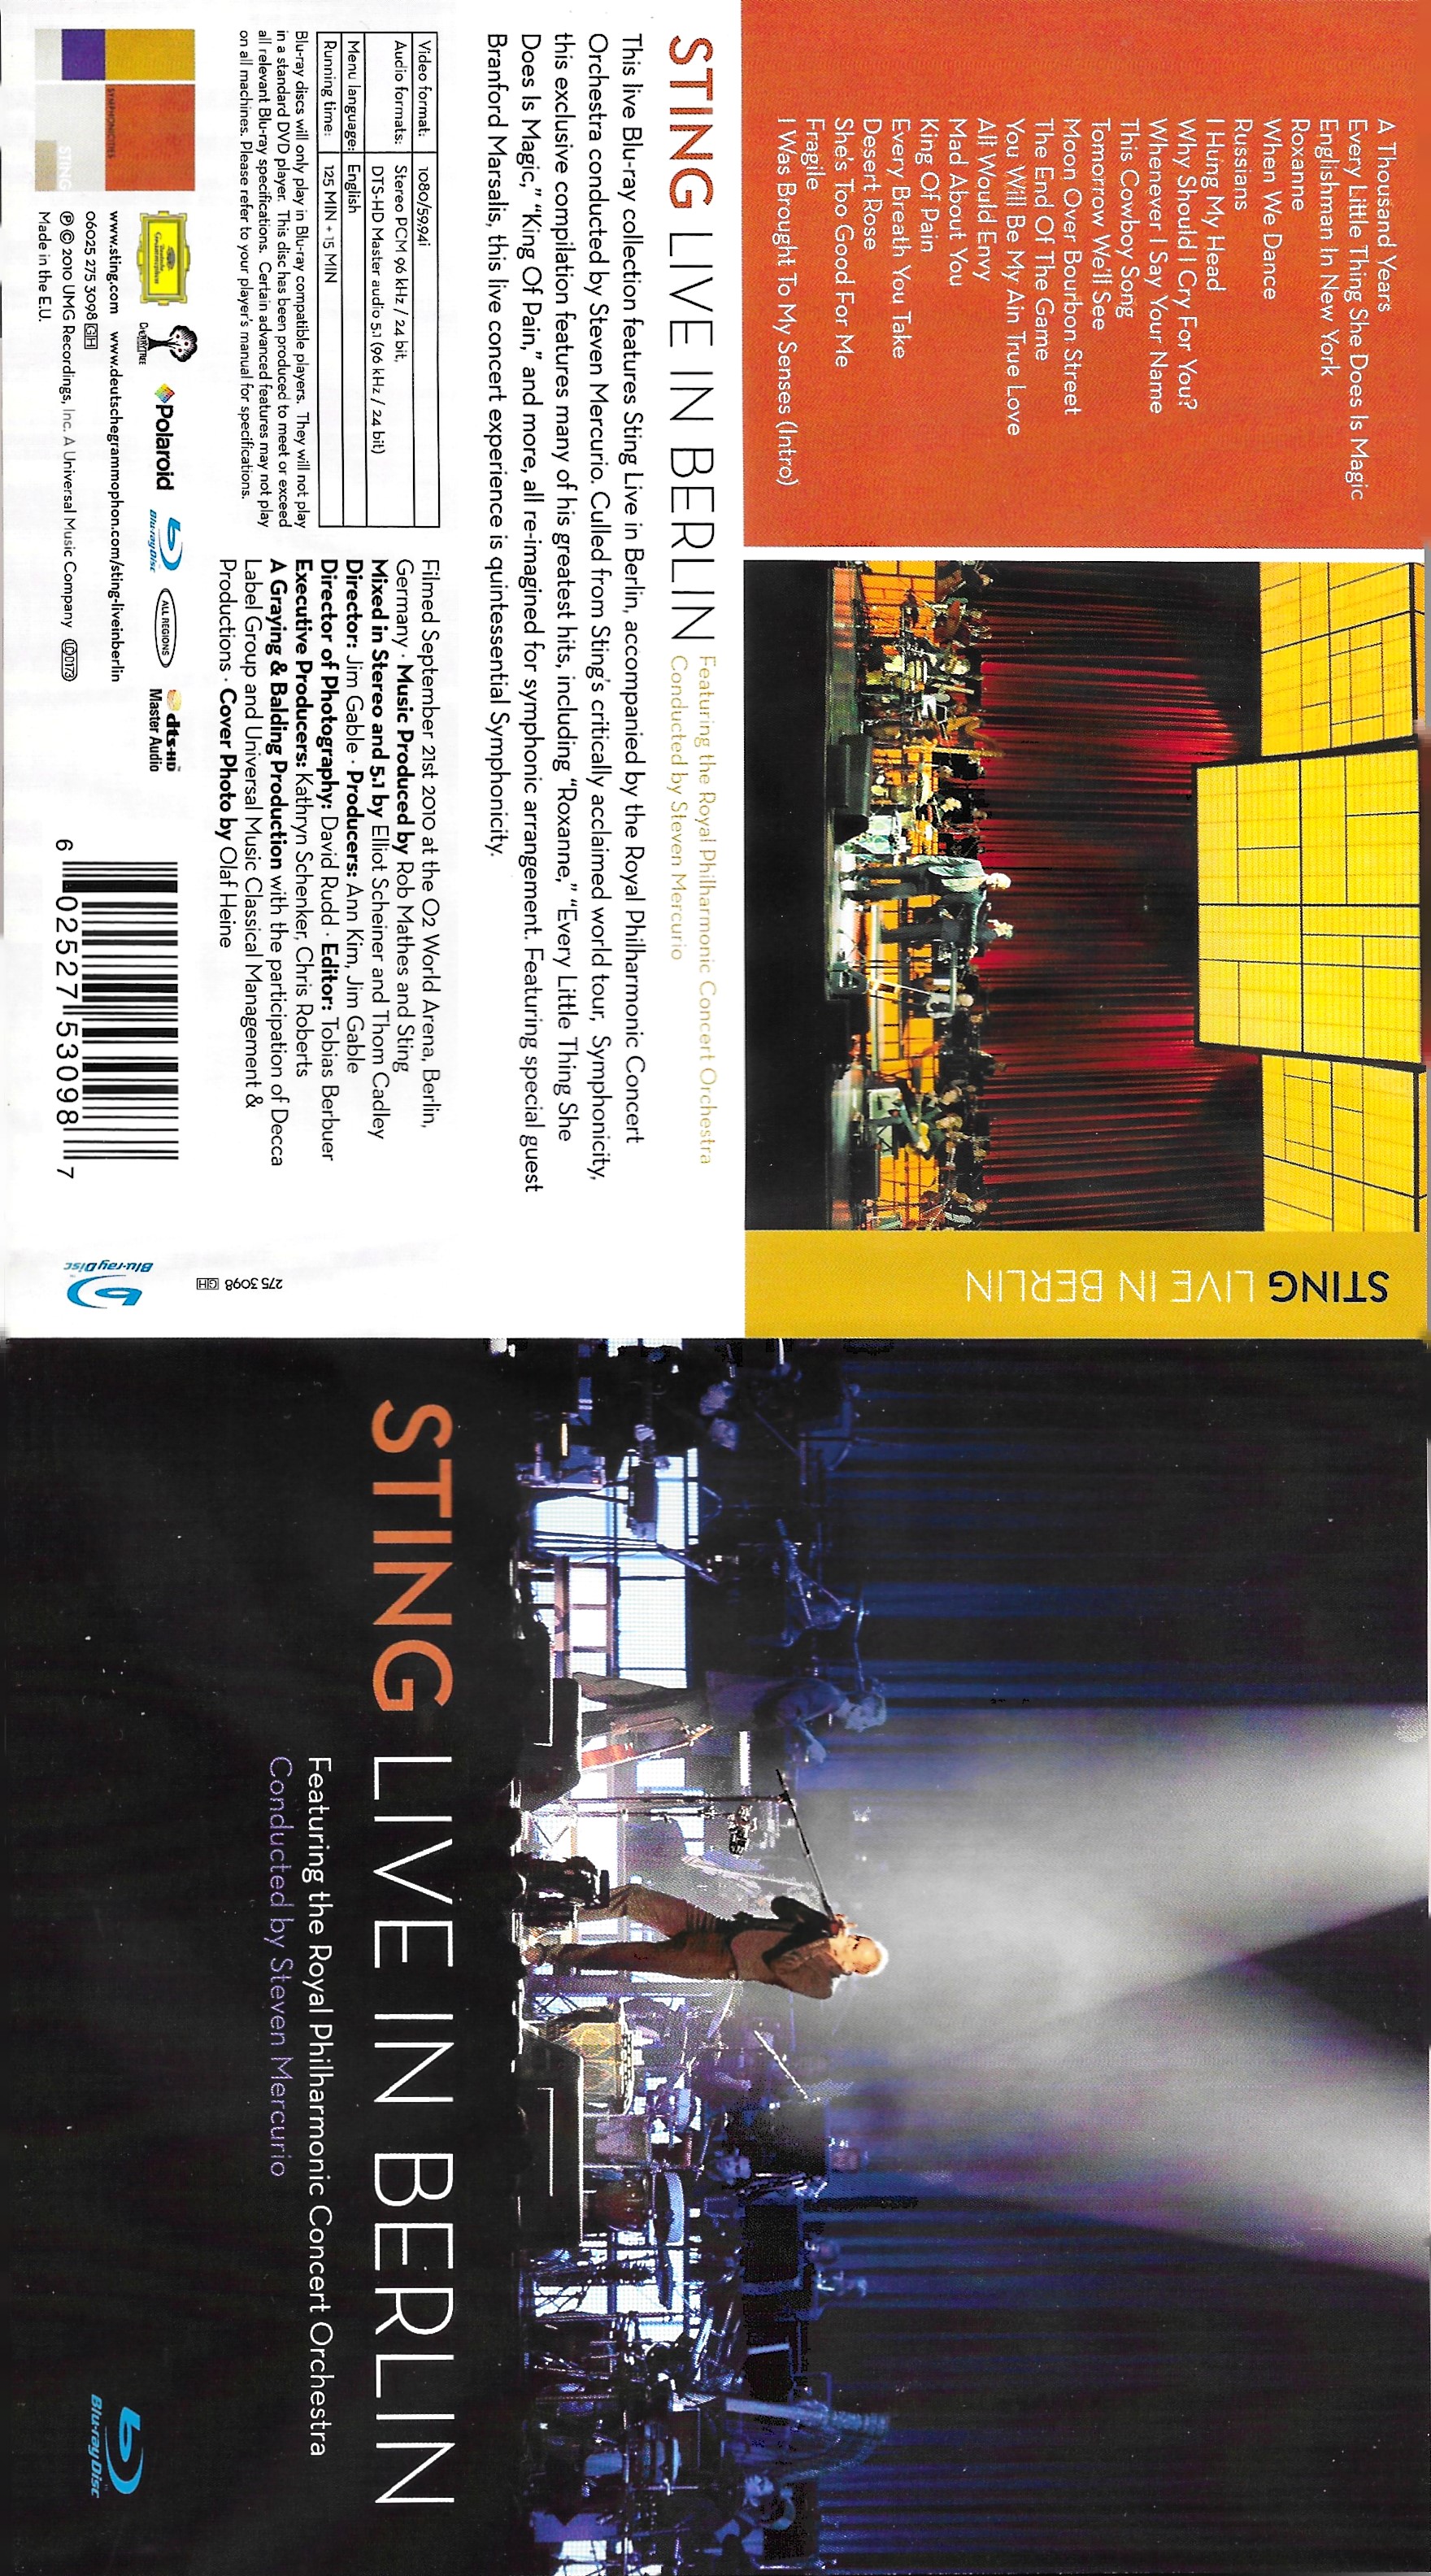 Jaquette DVD Sting live in berlin 2010 (BLU-RAY)